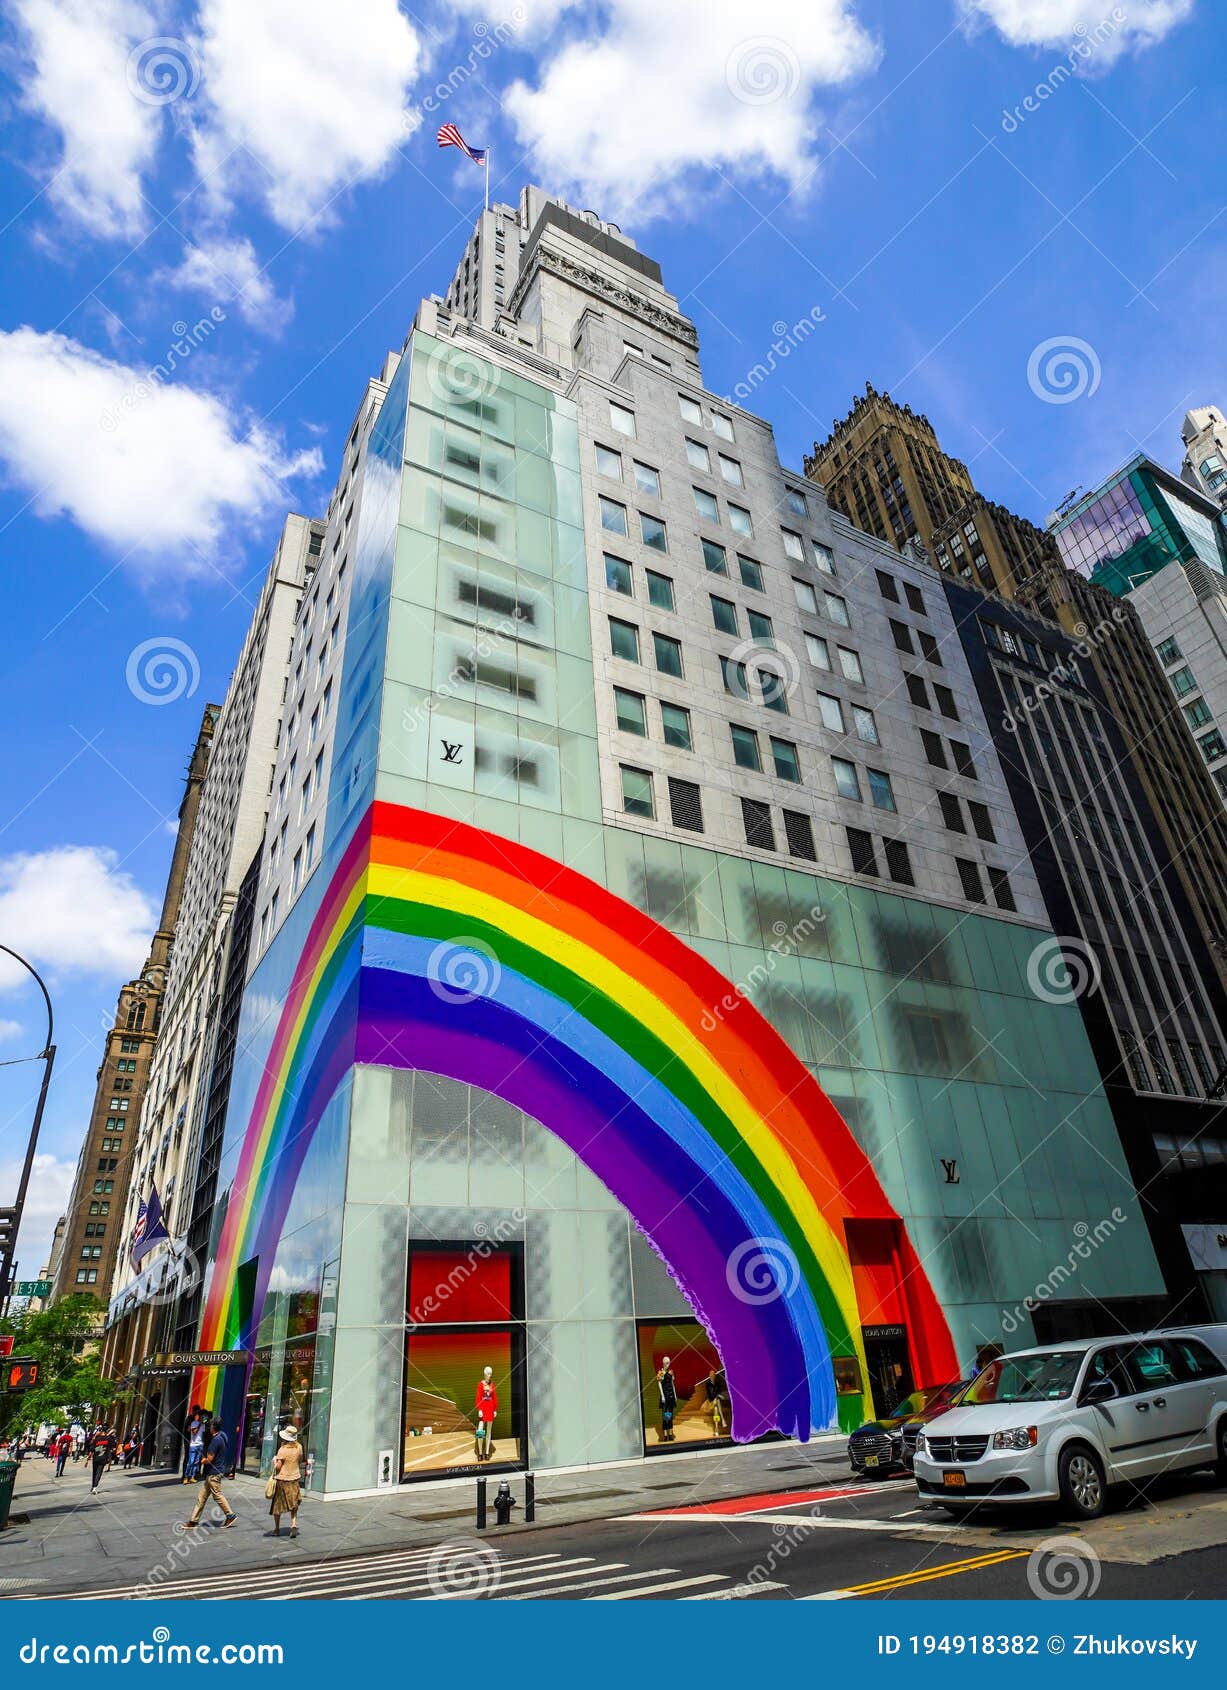 The Louis Vuitton store on Fifth Avenue is painted with rainbow